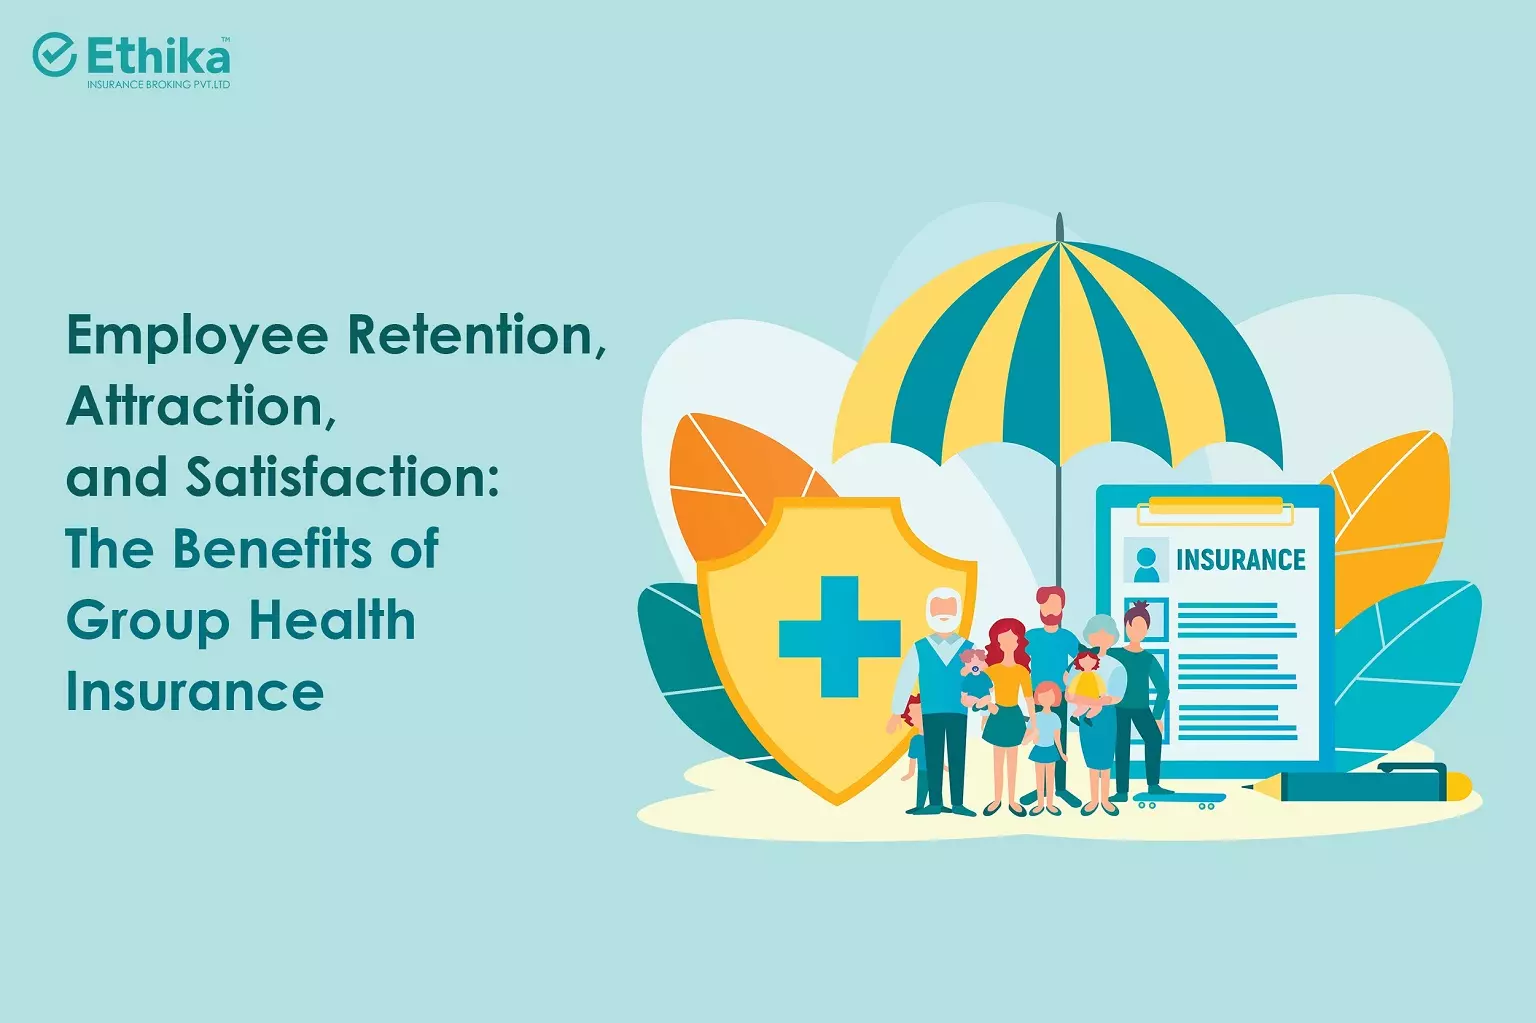 Employee Retention, Attraction, and Satisfaction: The Benefits of Group Health Insurance